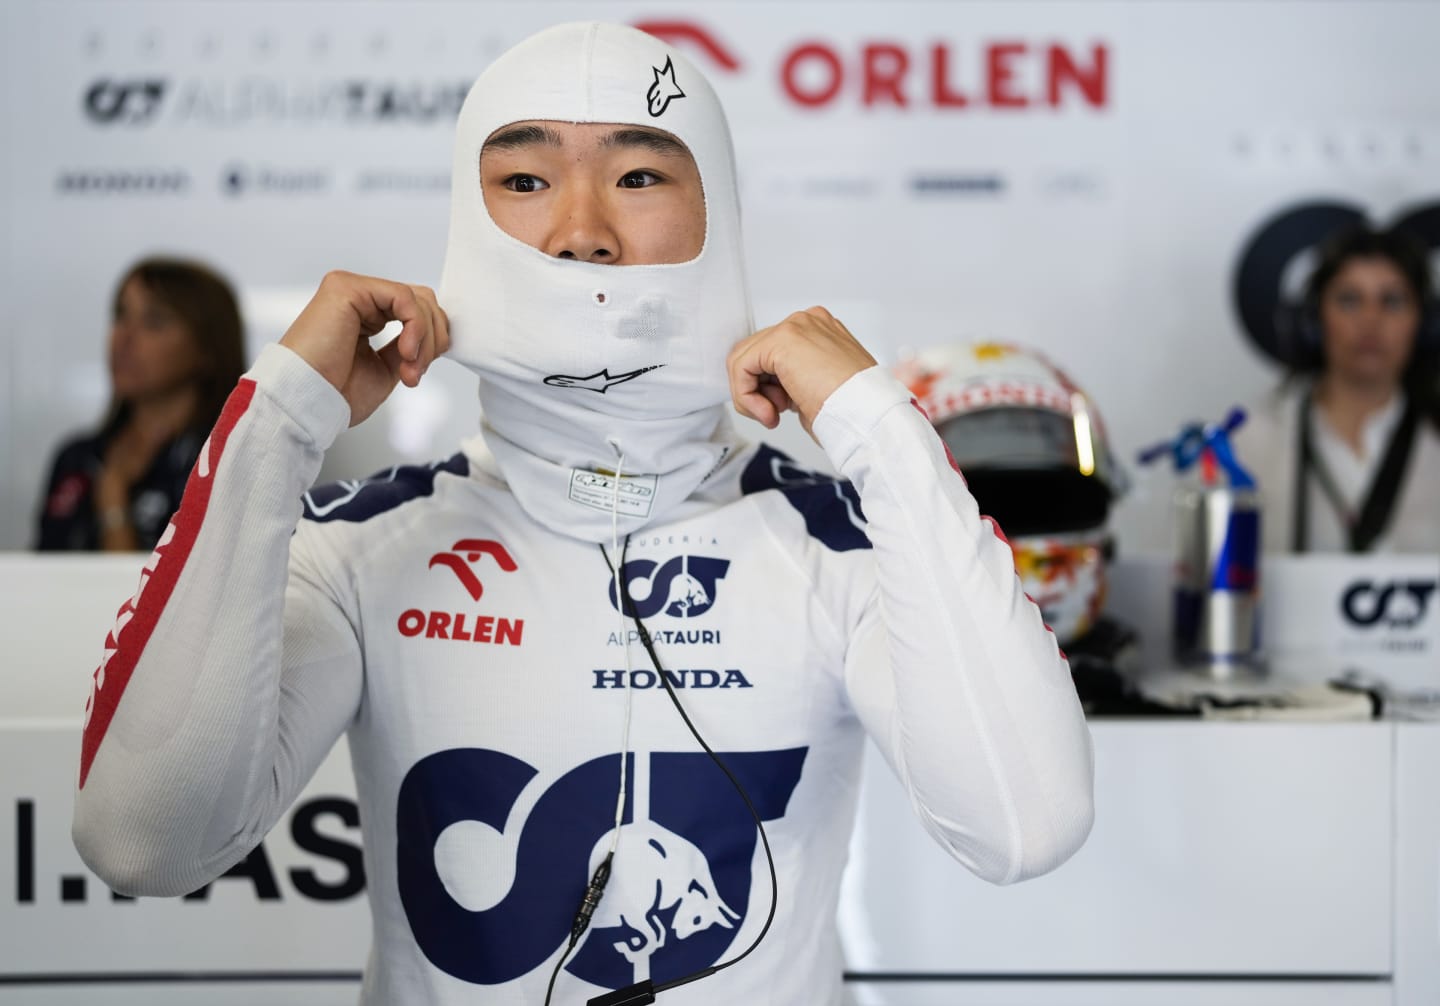 MONTREAL, QUEBEC - JUNE 16: Yuki Tsunoda of Japan and Scuderia AlphaTauri prepares to drive in the garage during practice ahead of the F1 Grand Prix of Canada at Circuit Gilles Villeneuve on June 16, 2023 in Montreal, Quebec. (Photo by Rudy Carezzevoli/Getty Images)